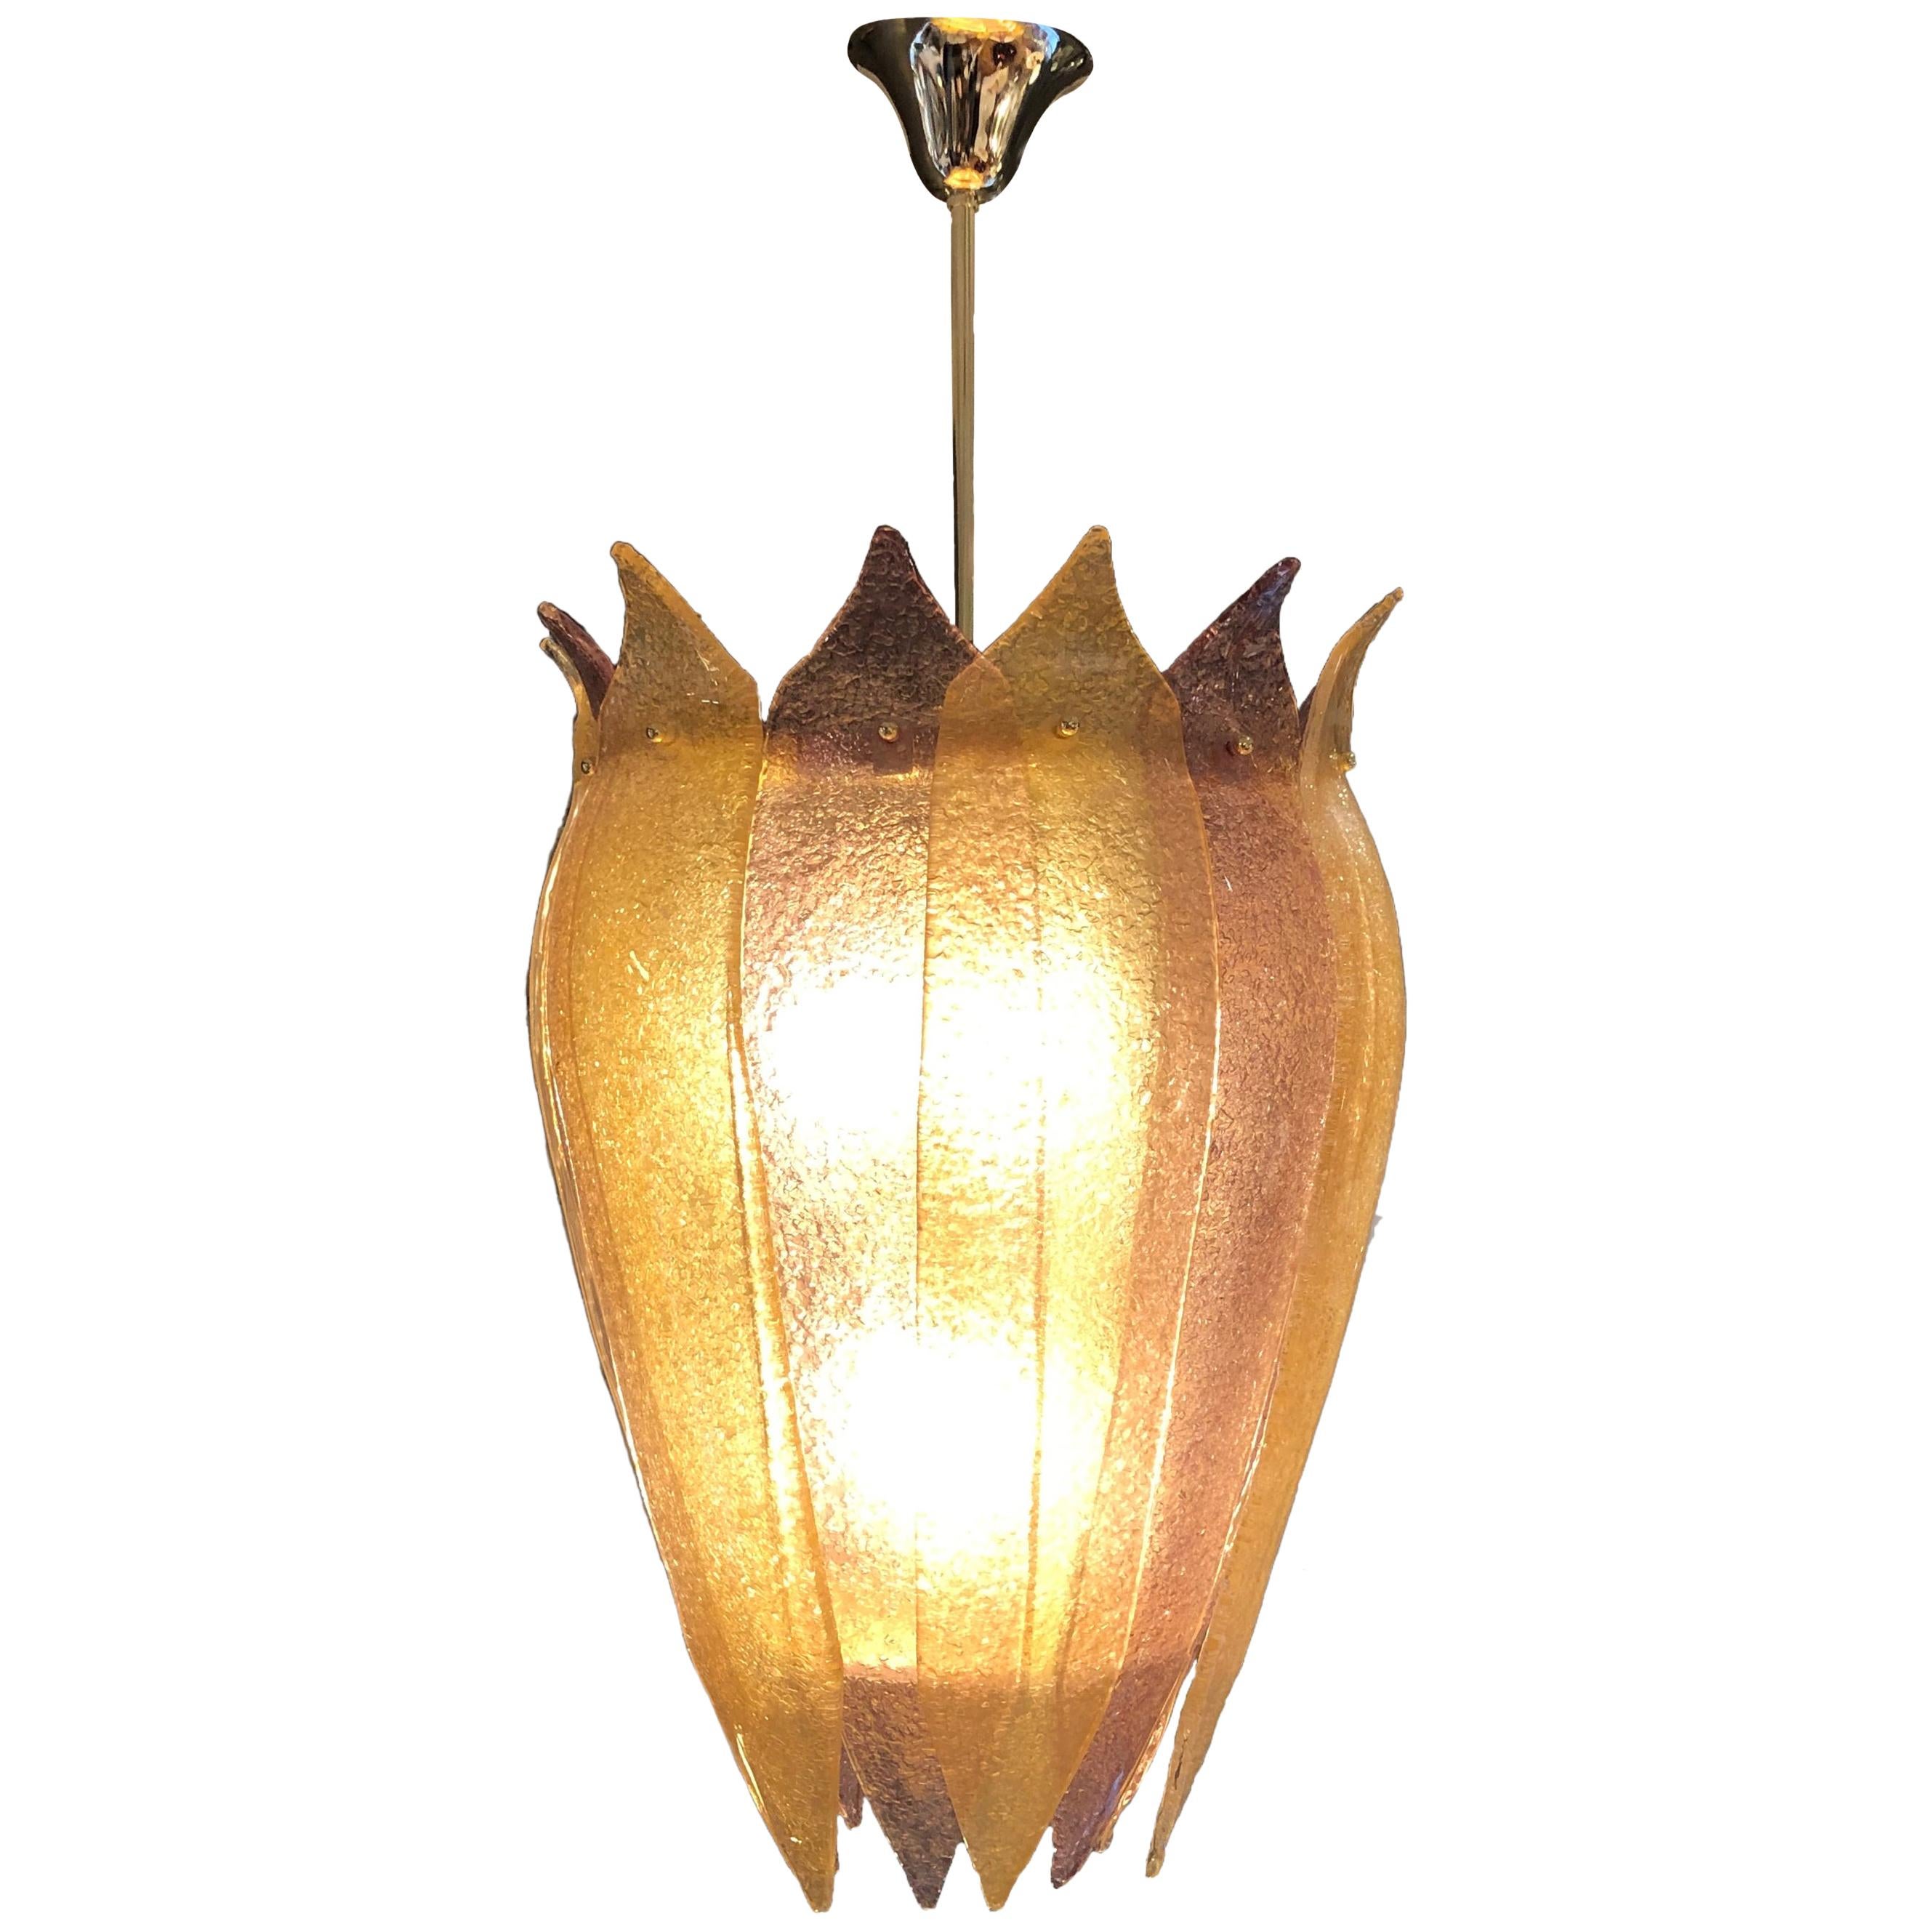 Murano Glass Chandelier at cost price.